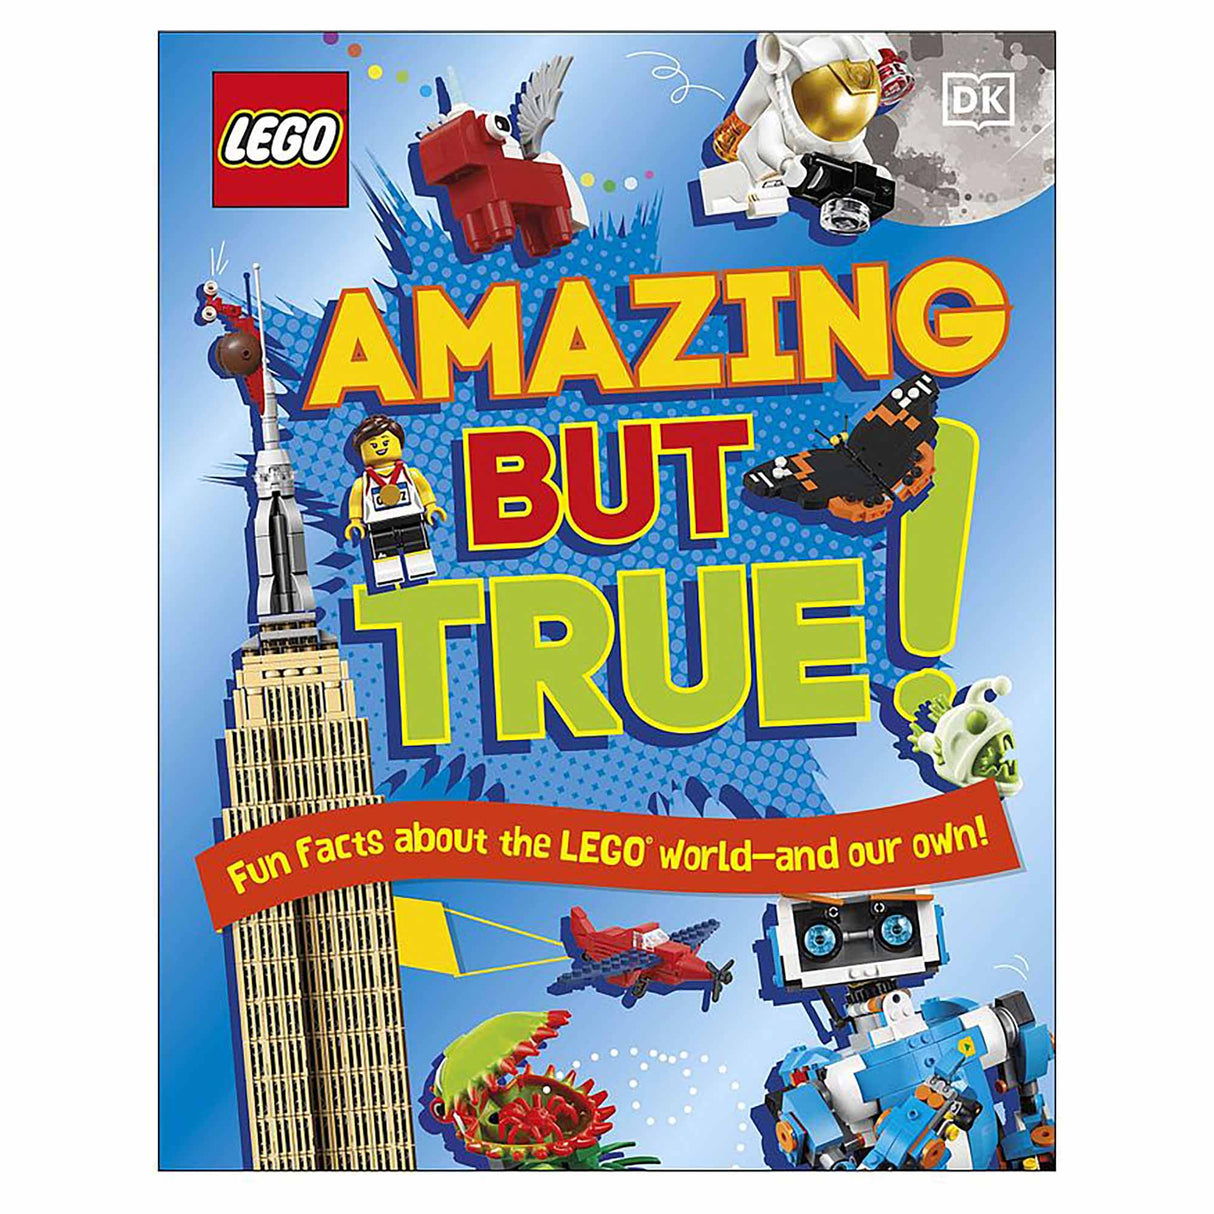 Penguin Lego Amazing But True - Fun Facts About the Lego World and Our Own! Hardback Book by DK